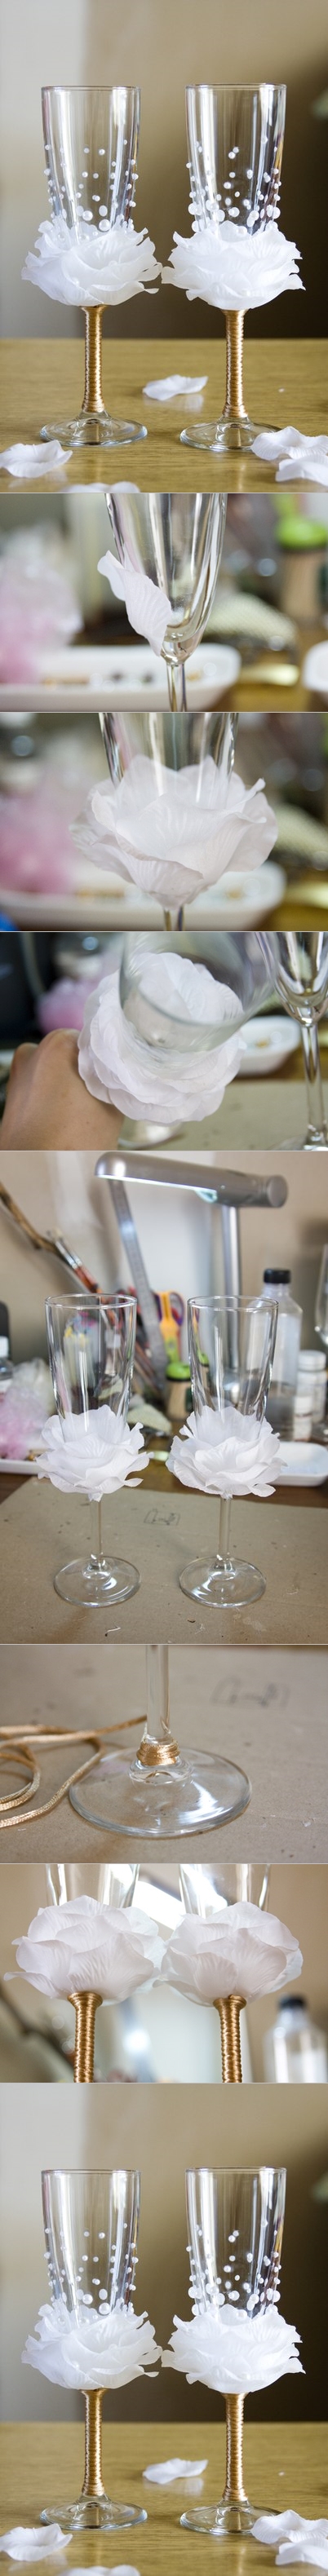 wine glass decorate  Wonderful DIY  Wine Glasses Decoration With Flowers and Beads